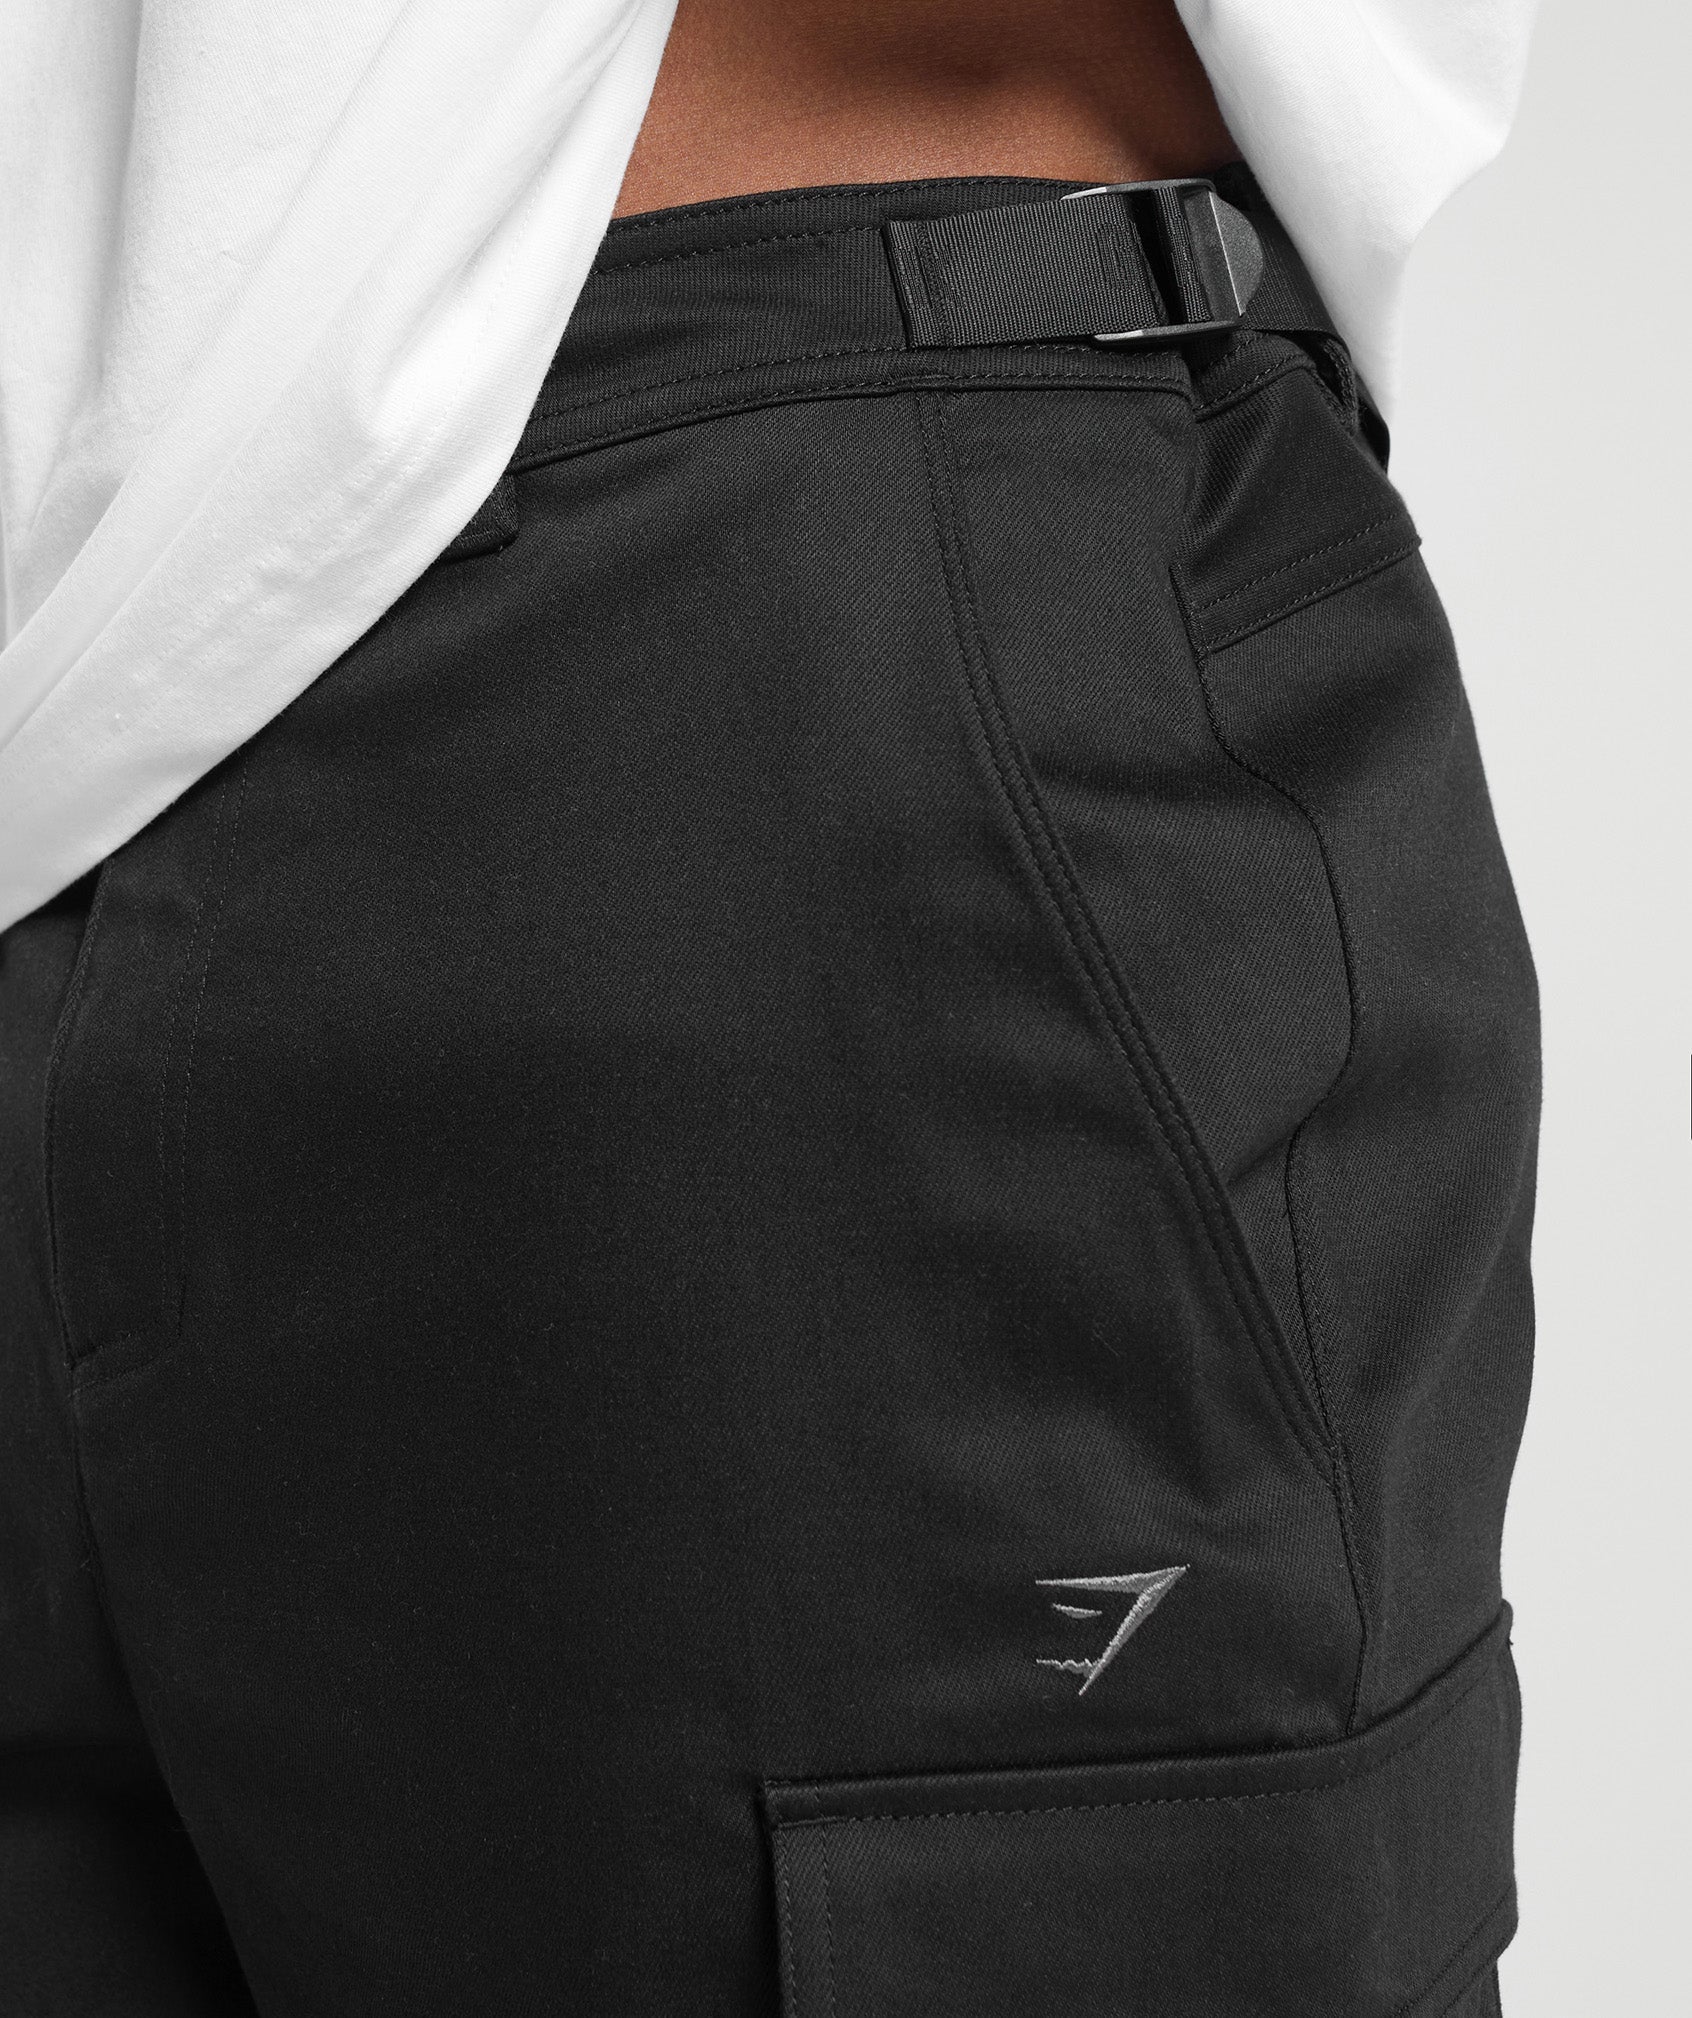 Rest Day Woven Cargo Pants in Black - view 7